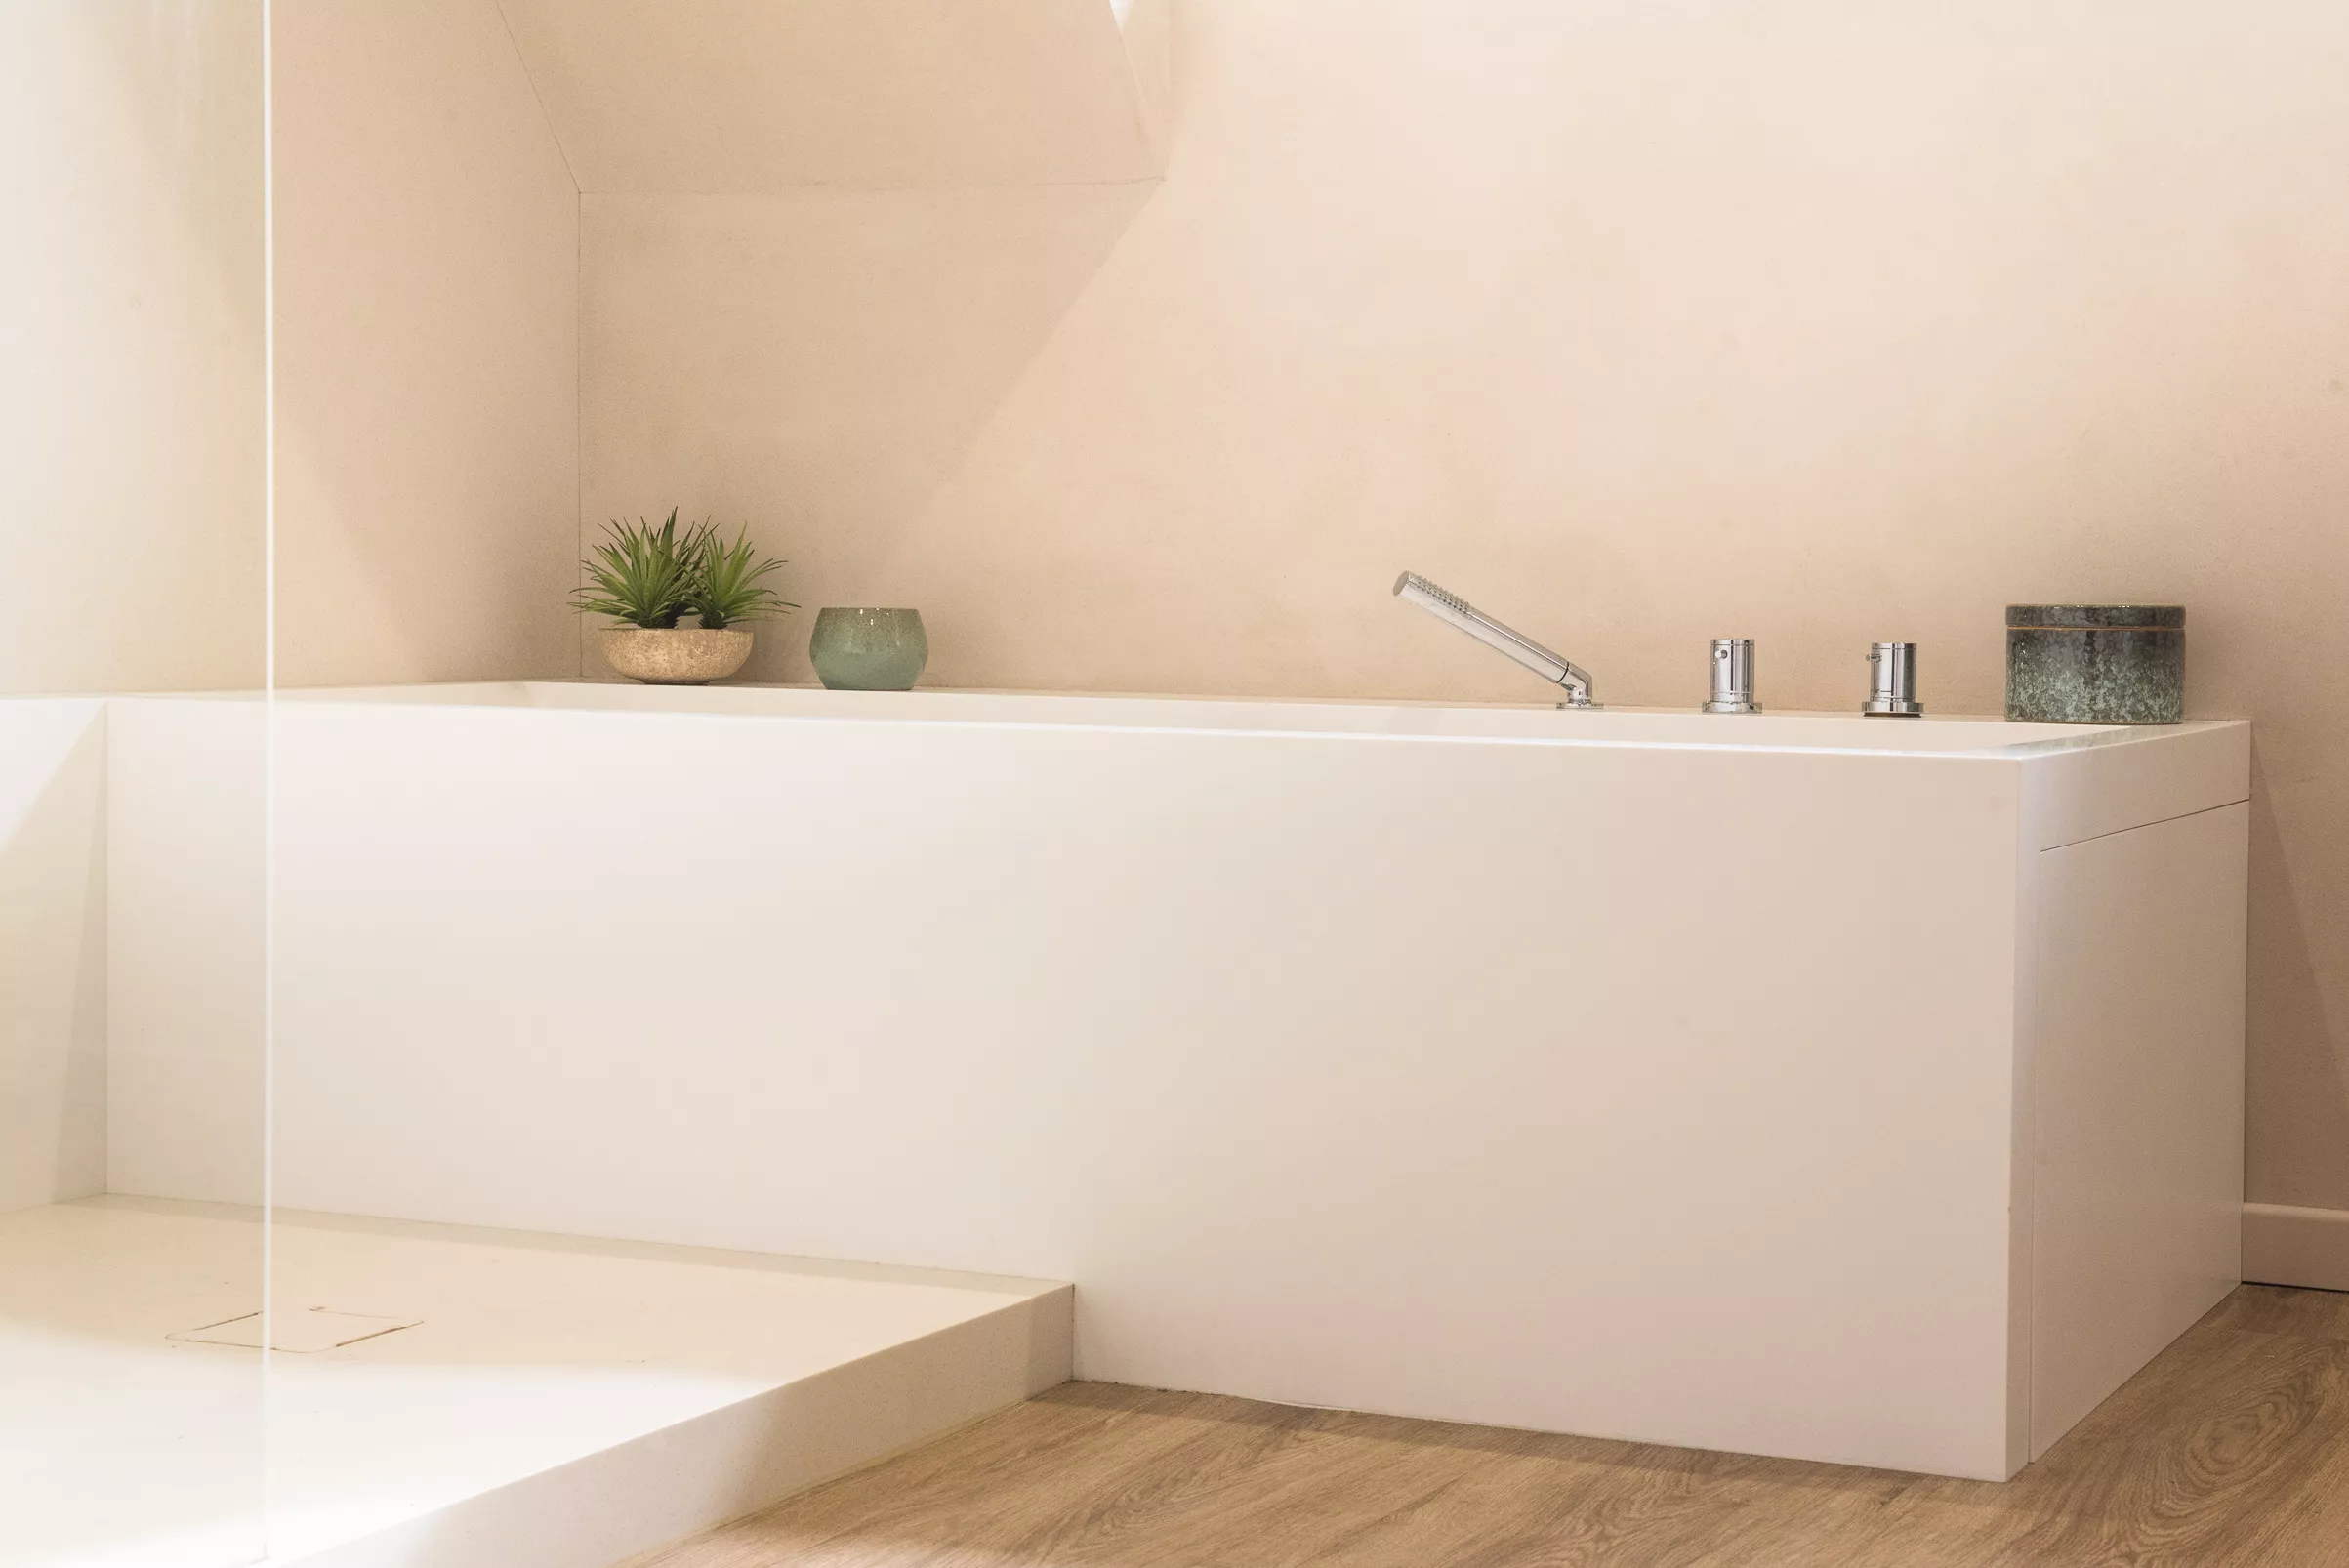 A refined bathroom in HIMACS exuding harmony and serenity